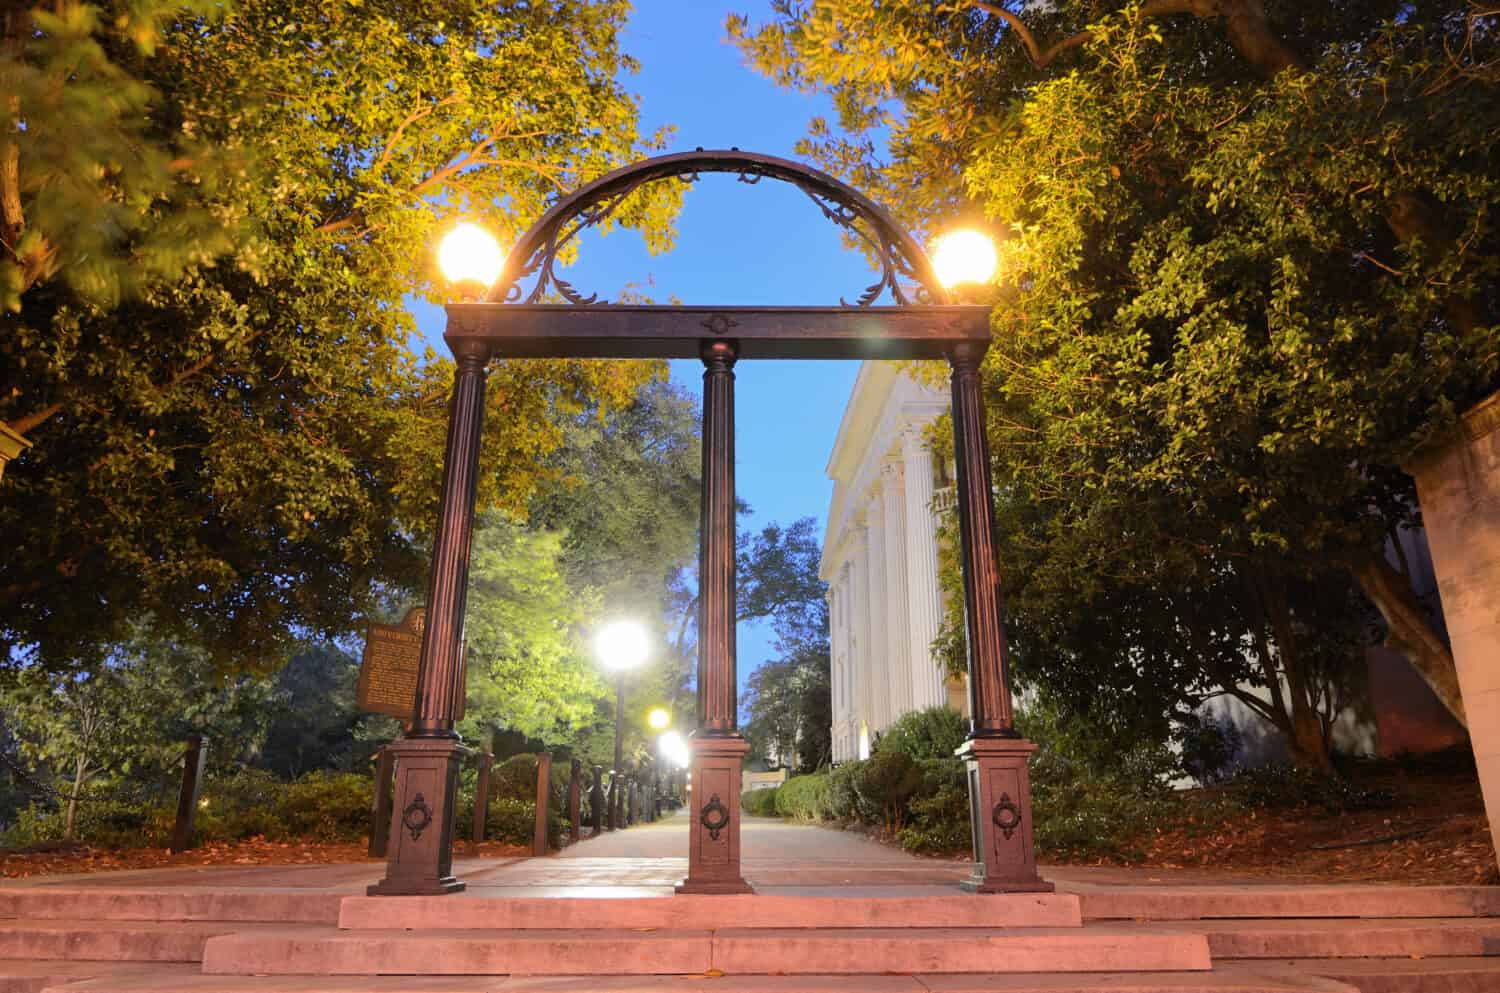 Historic steel archway on the campus of the University of Georgia in Athens, Georgia, USA.